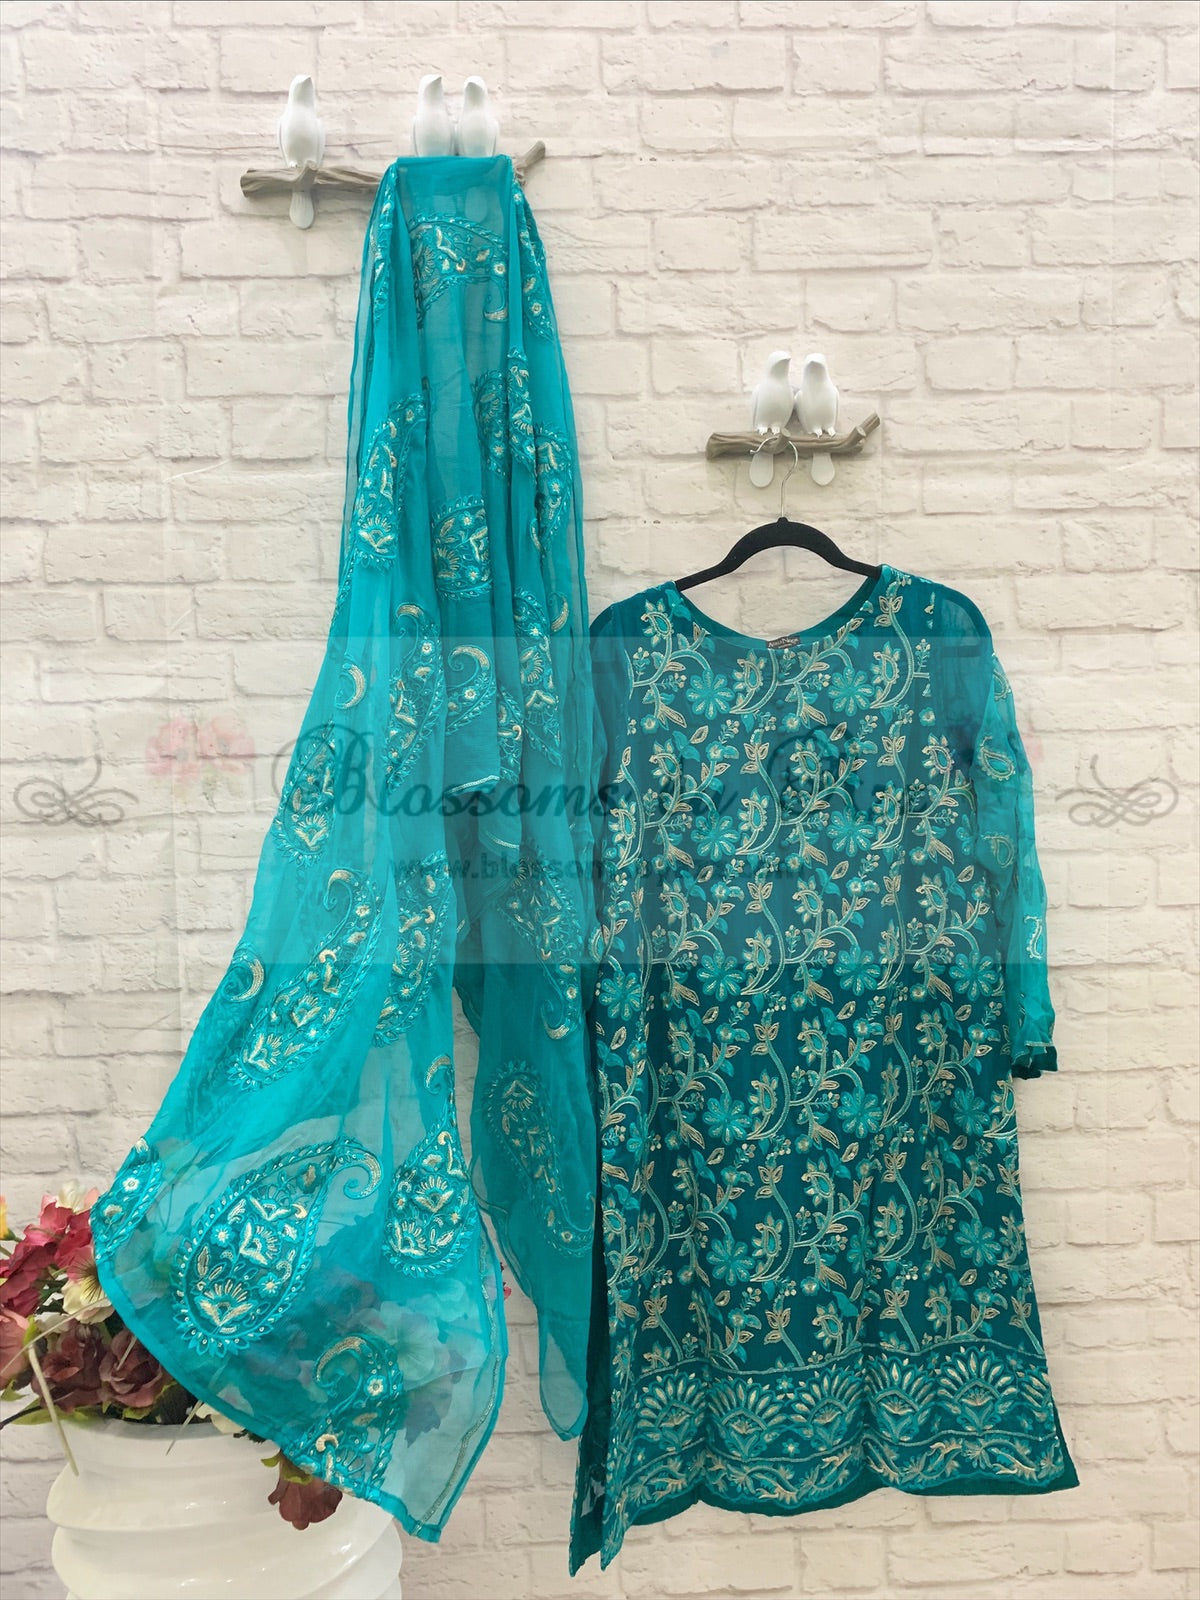 Agha Noor Shirt with Agha Noor Dupatta & Plain Straight Pants - Sea Green - Blossoms by Azz